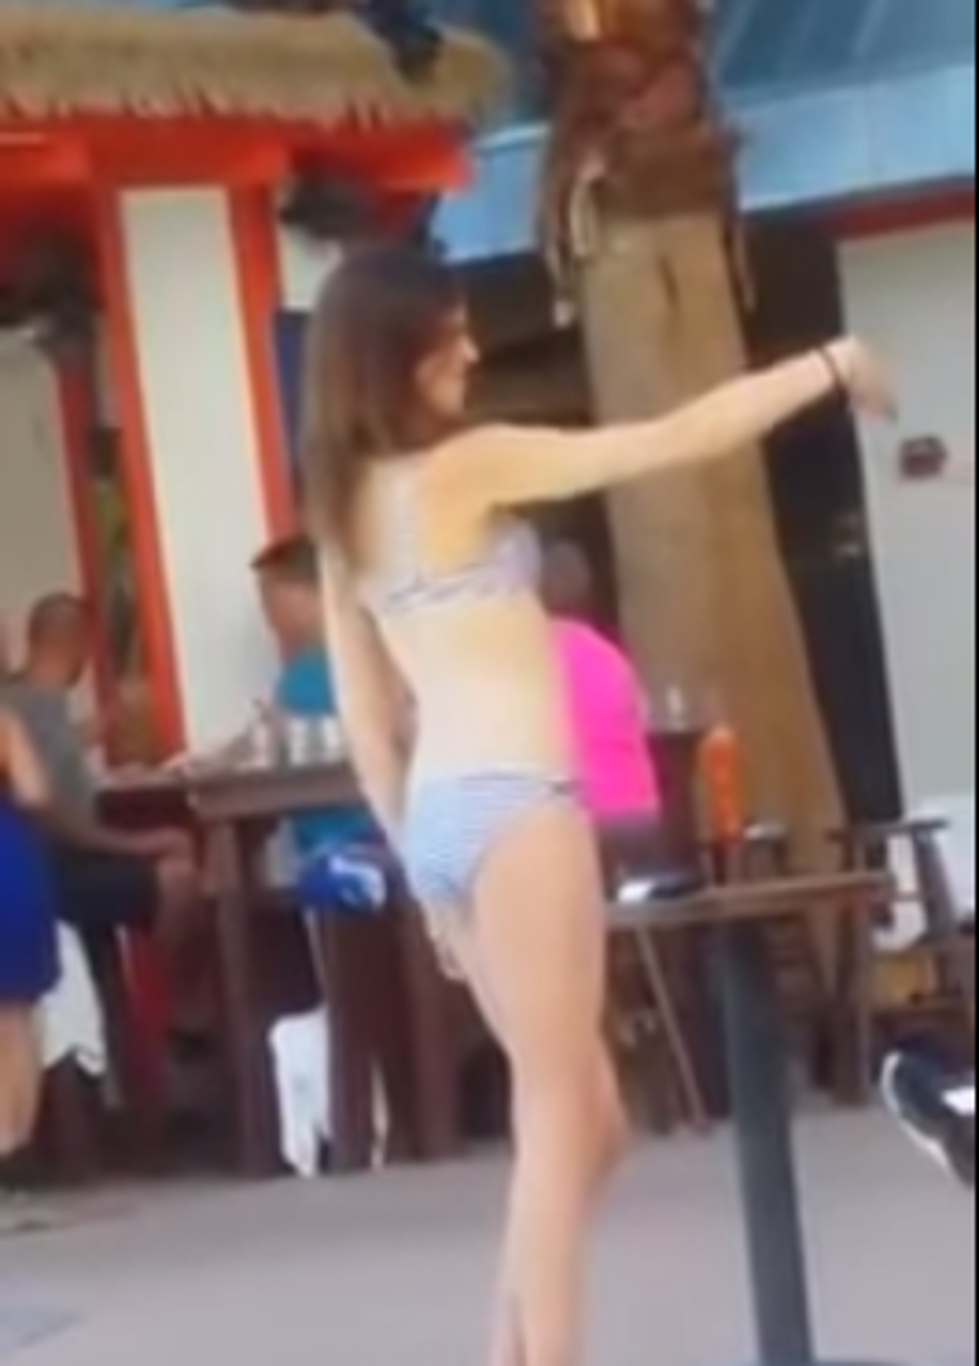 Woman Caught Spending Over A Minute On One Selfie [NSFW VIDEO]